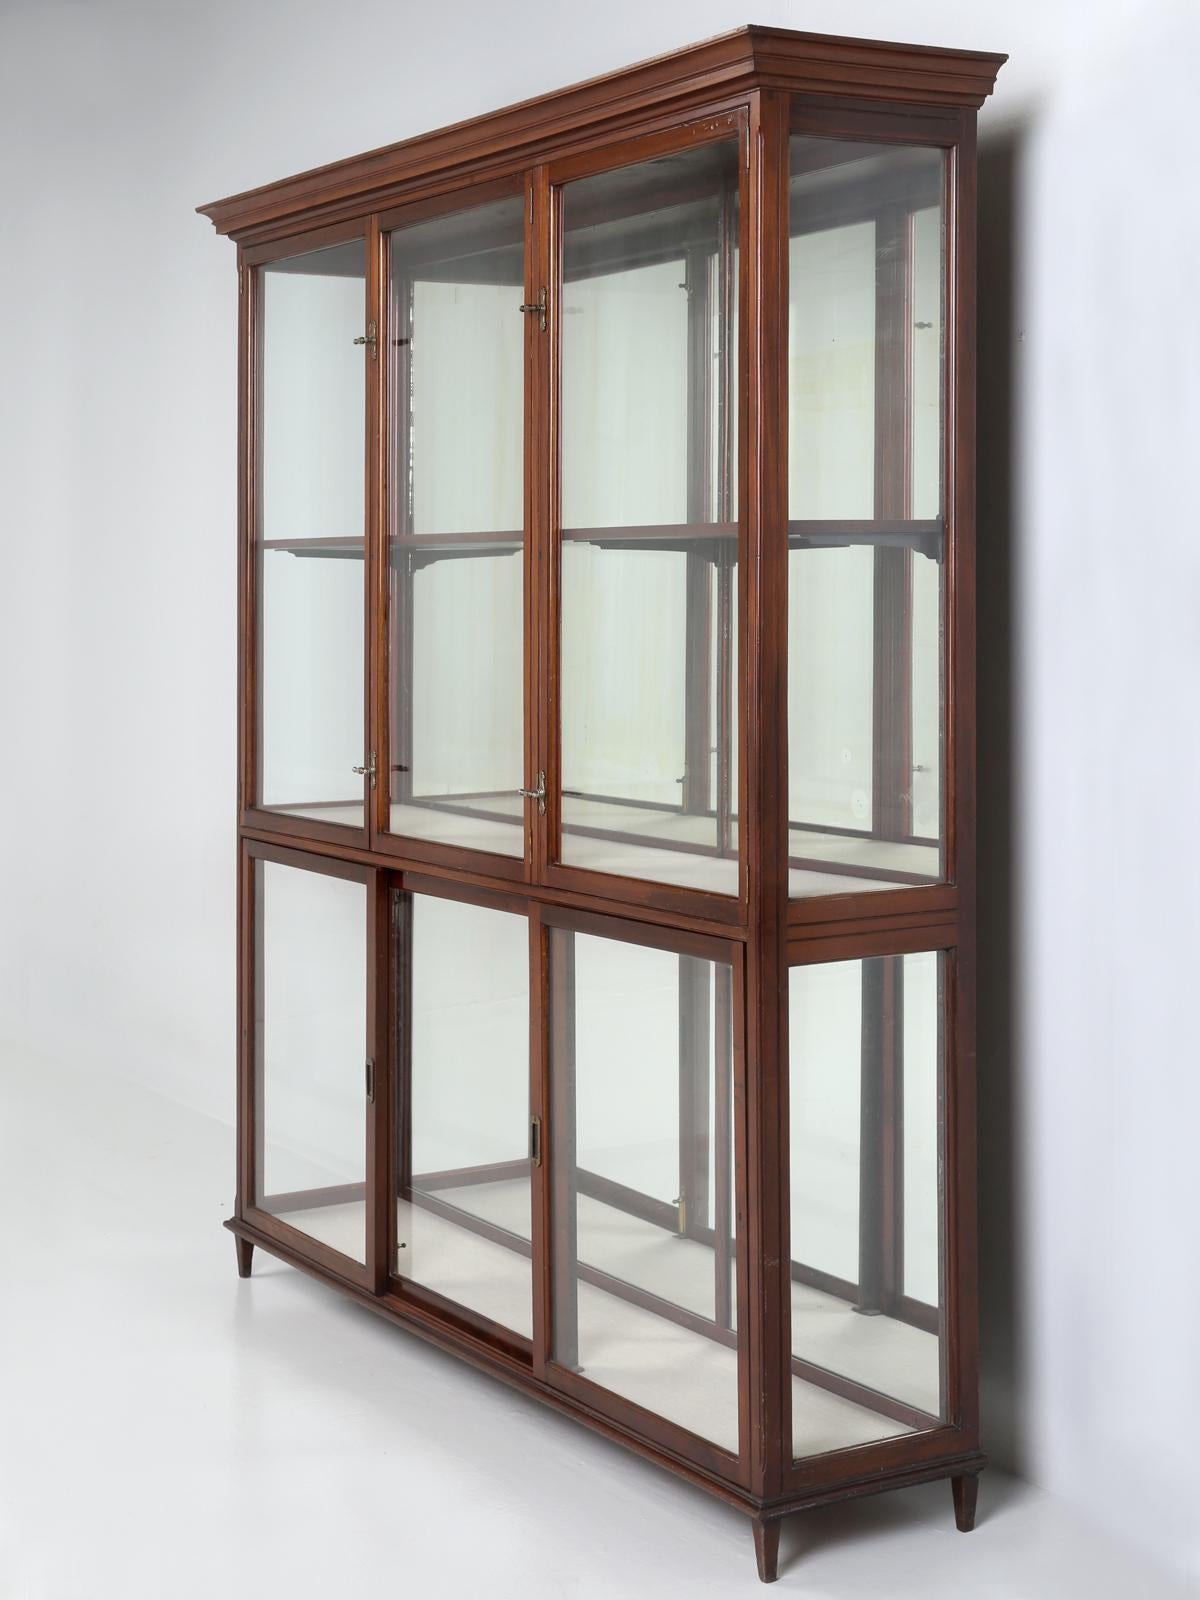 Antique English Display Cabinet or Curio Cabinet, that was most likely used in a Luxury Department Store and probably around the turn-of-the-century. I mention luxury, because of the unusual attention to detail, in which this display cabinet was